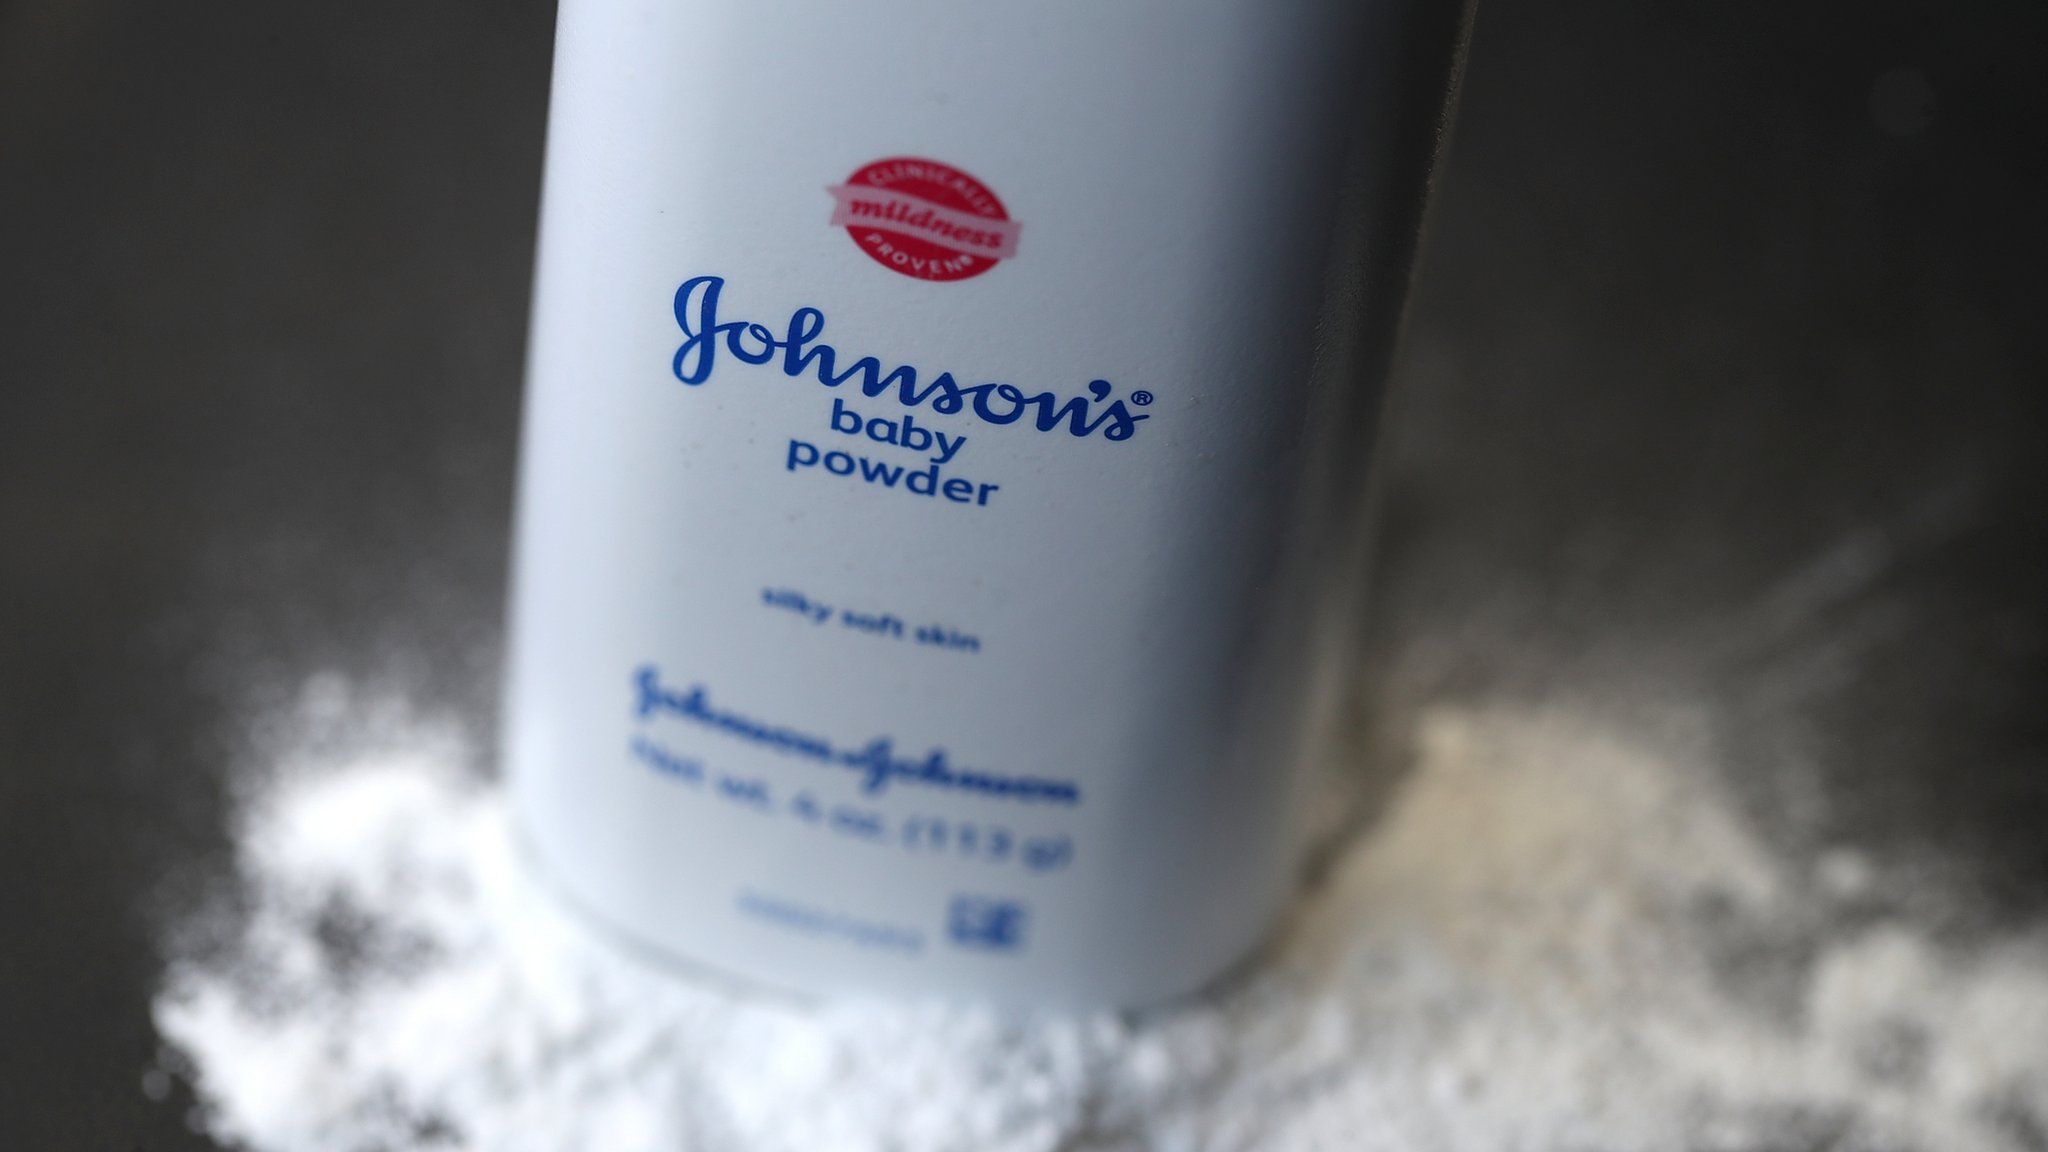 A container of Johnson's baby powder (file photo)